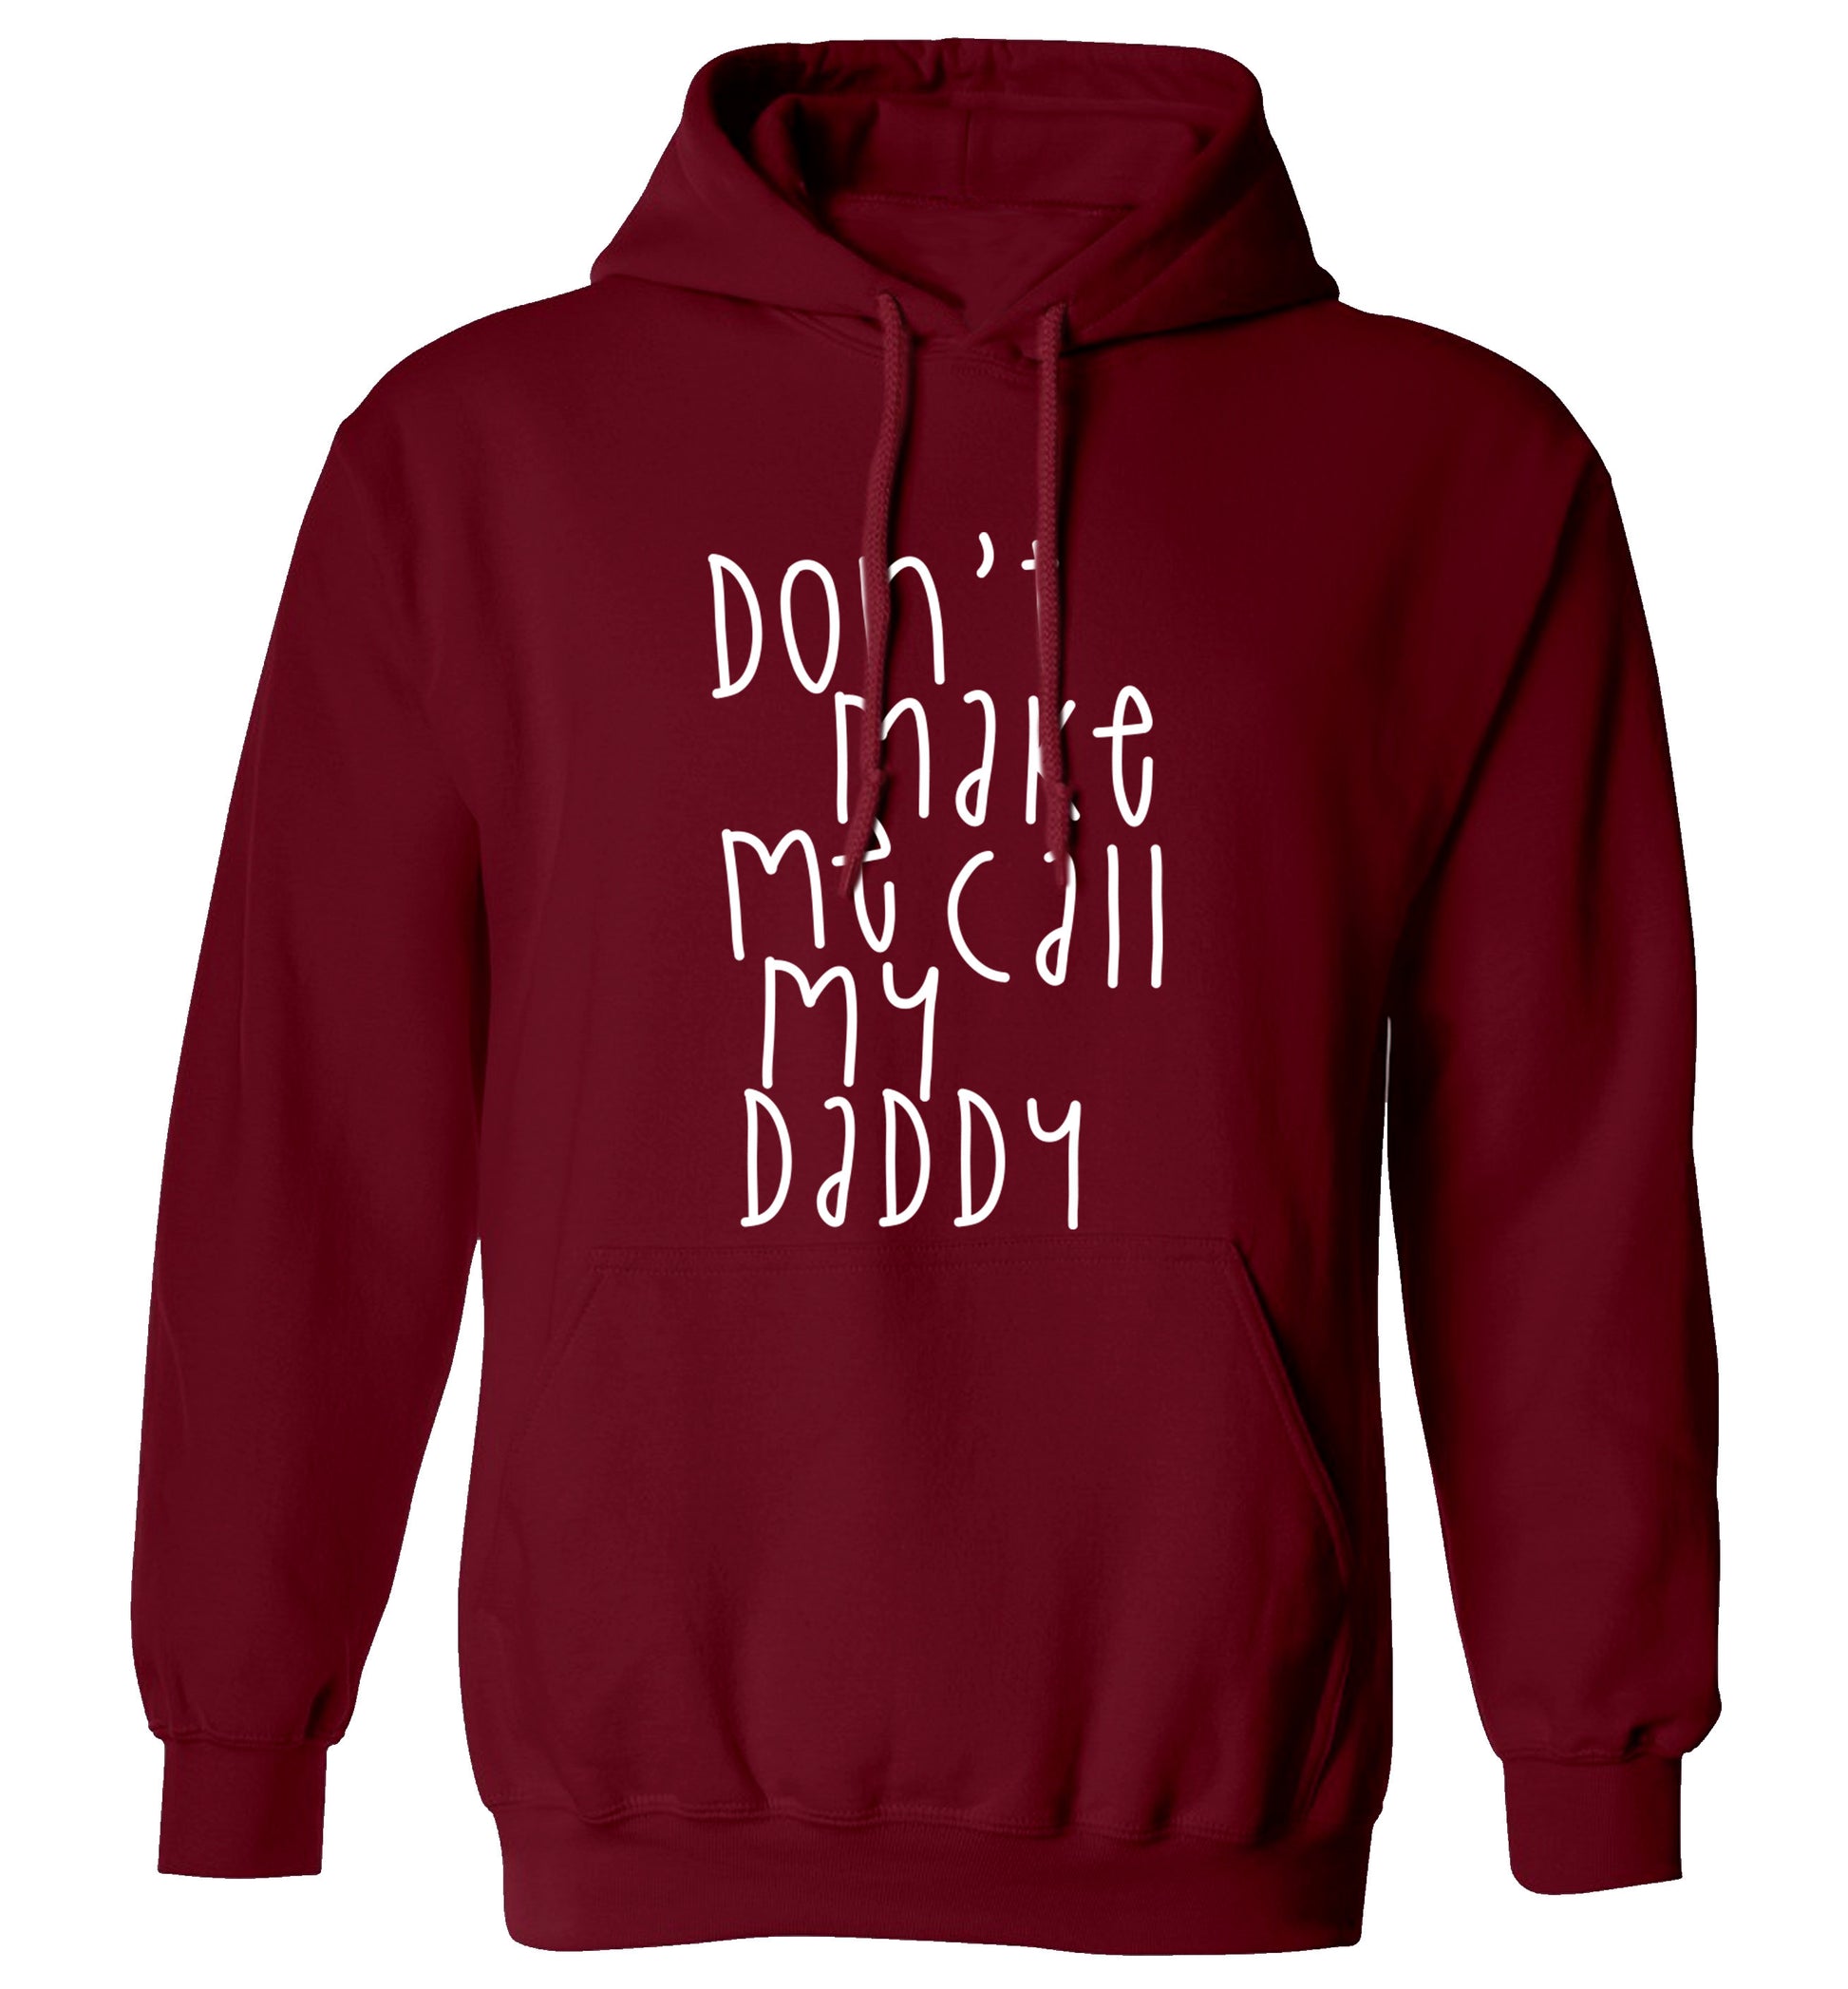 Don't make me call my daddy adults unisex maroon hoodie 2XL